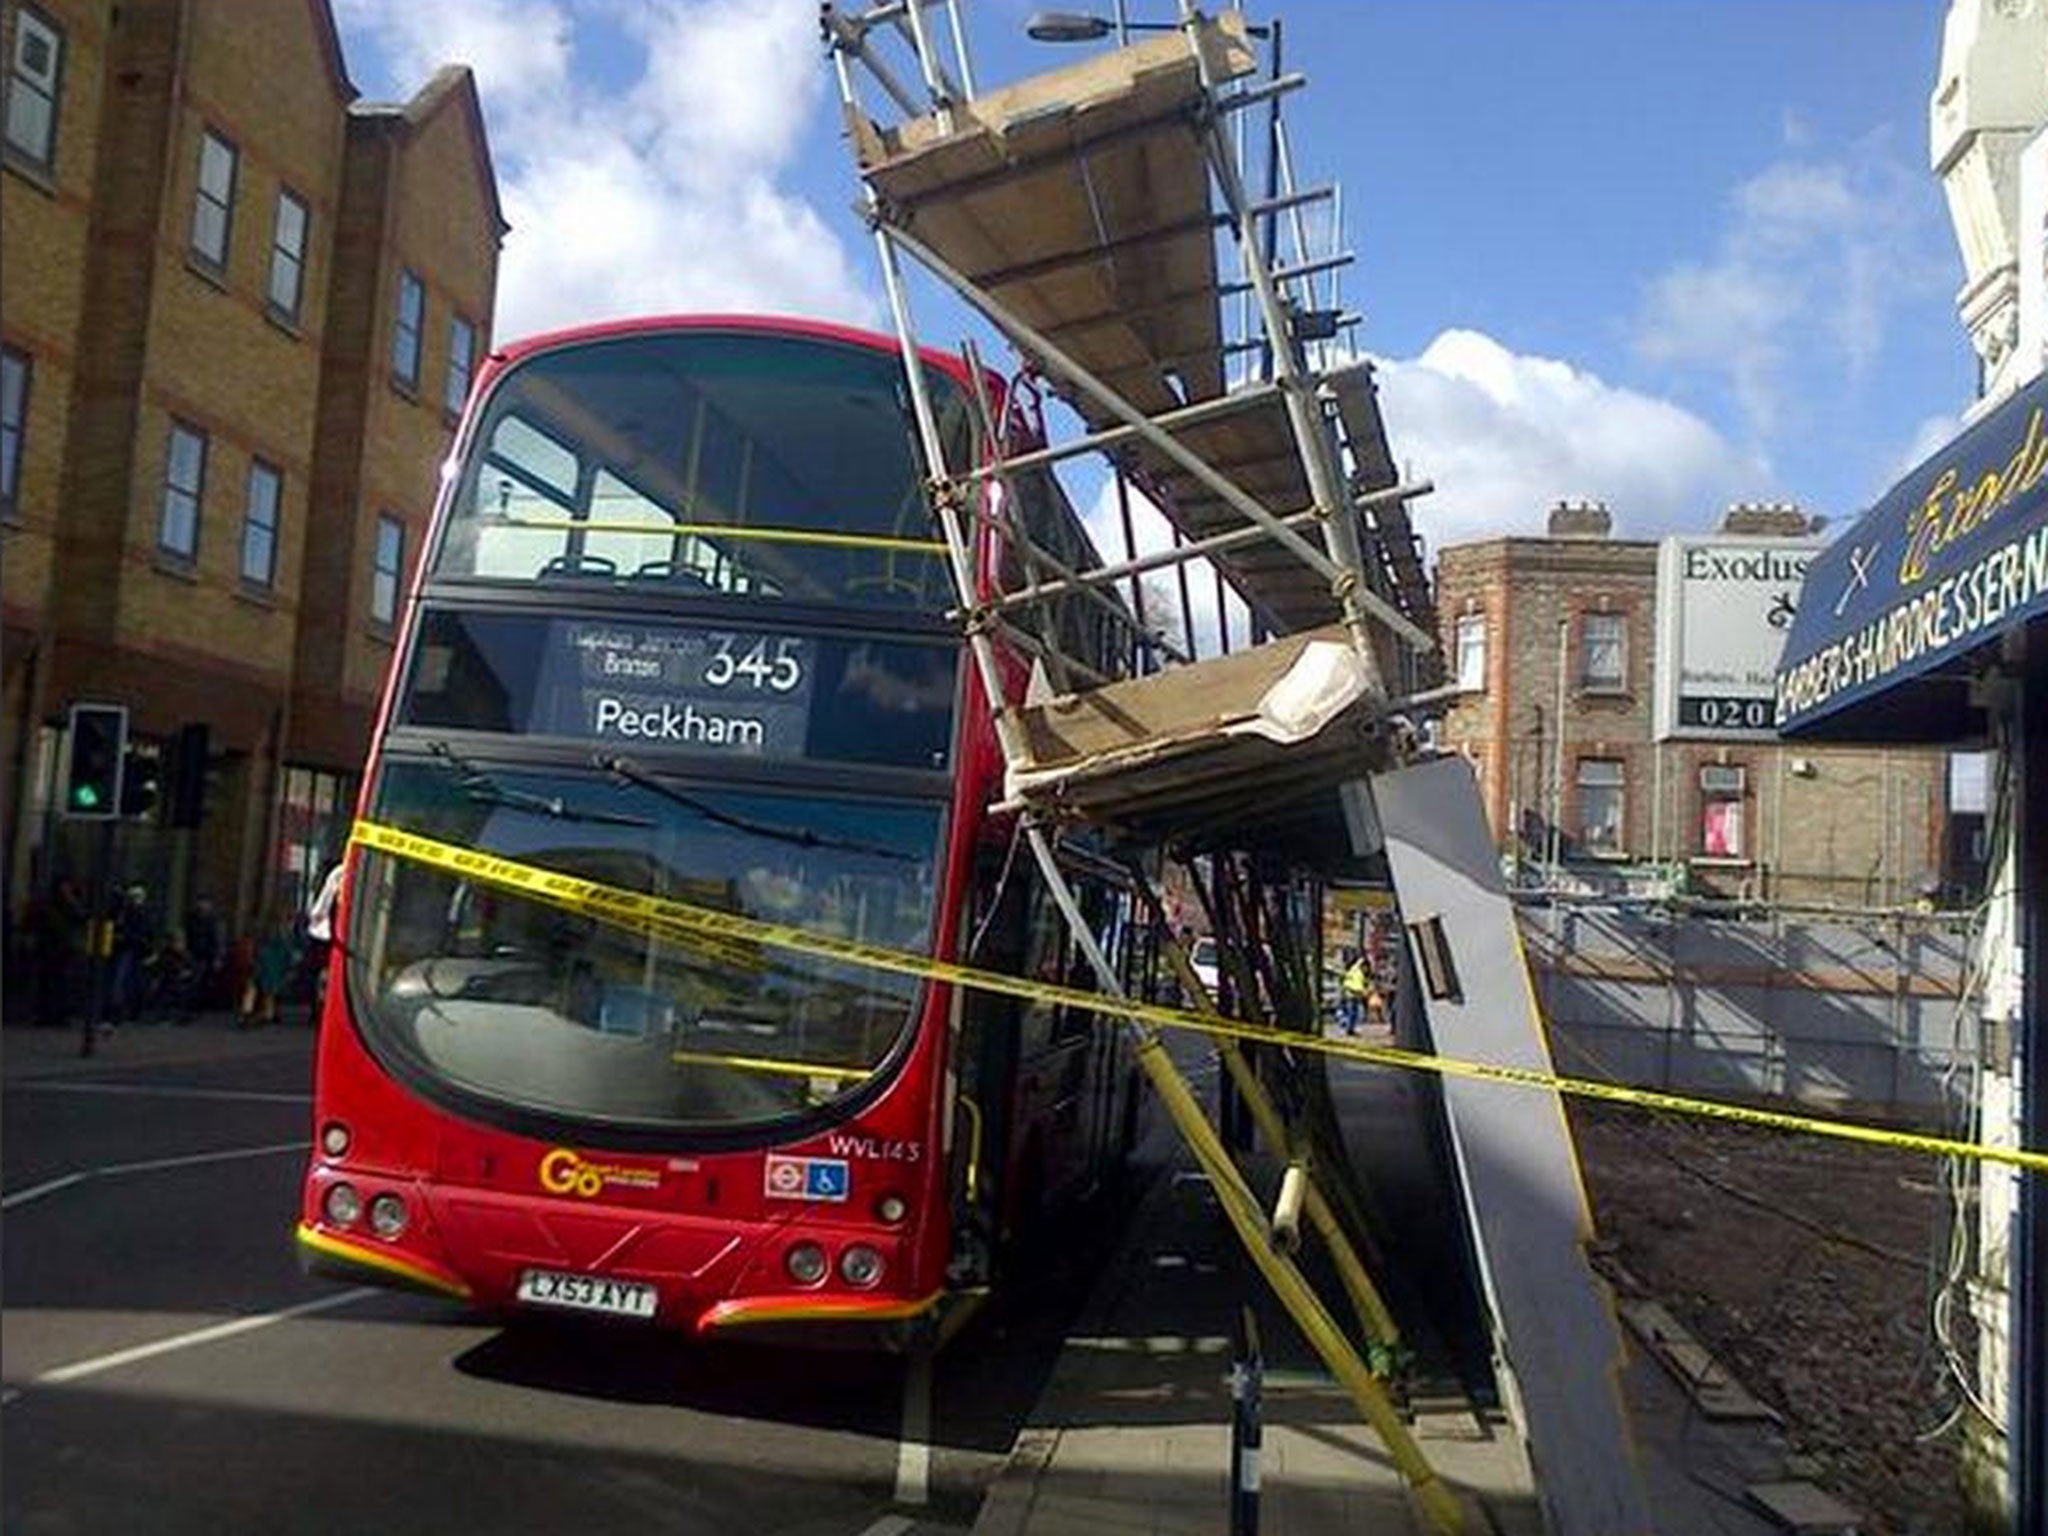 Firefighters said it was a 'miracle' no one was hurt when the scaffolding collapsed in Peckham